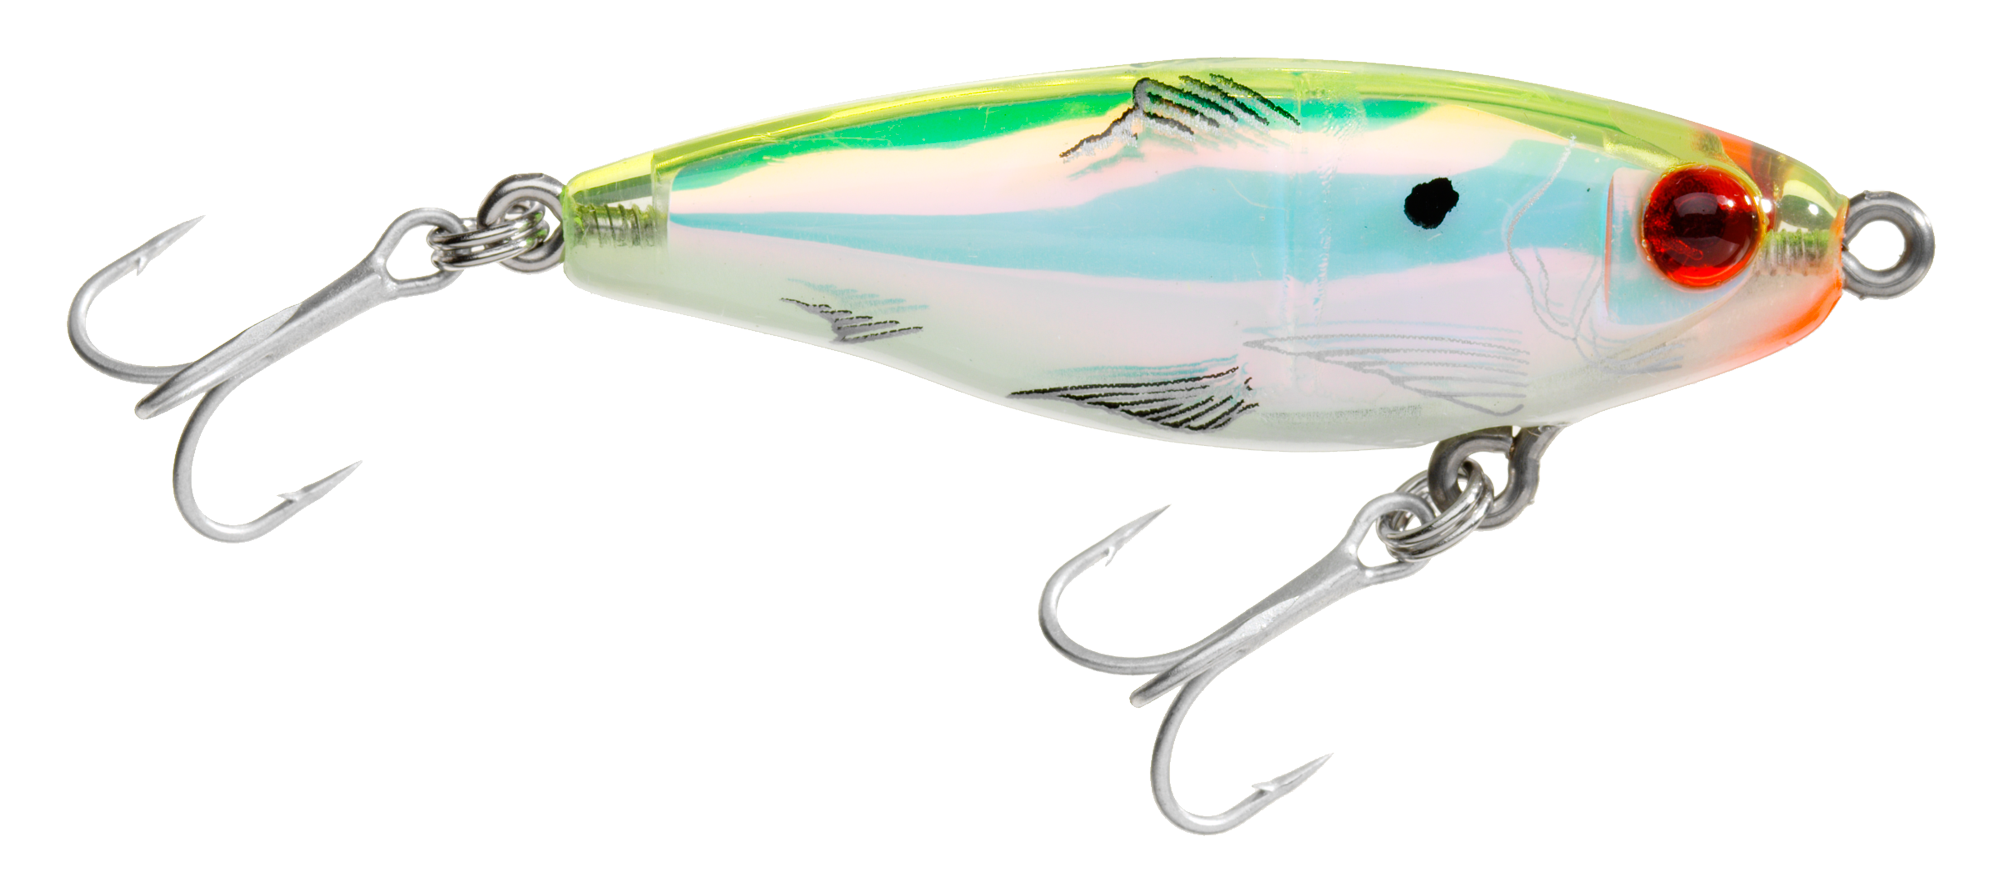  Atom 56PB BS Striper Swiper, 2-Ounce, Blue/Silver : Fishing  Floating Lures : Sports & Outdoors